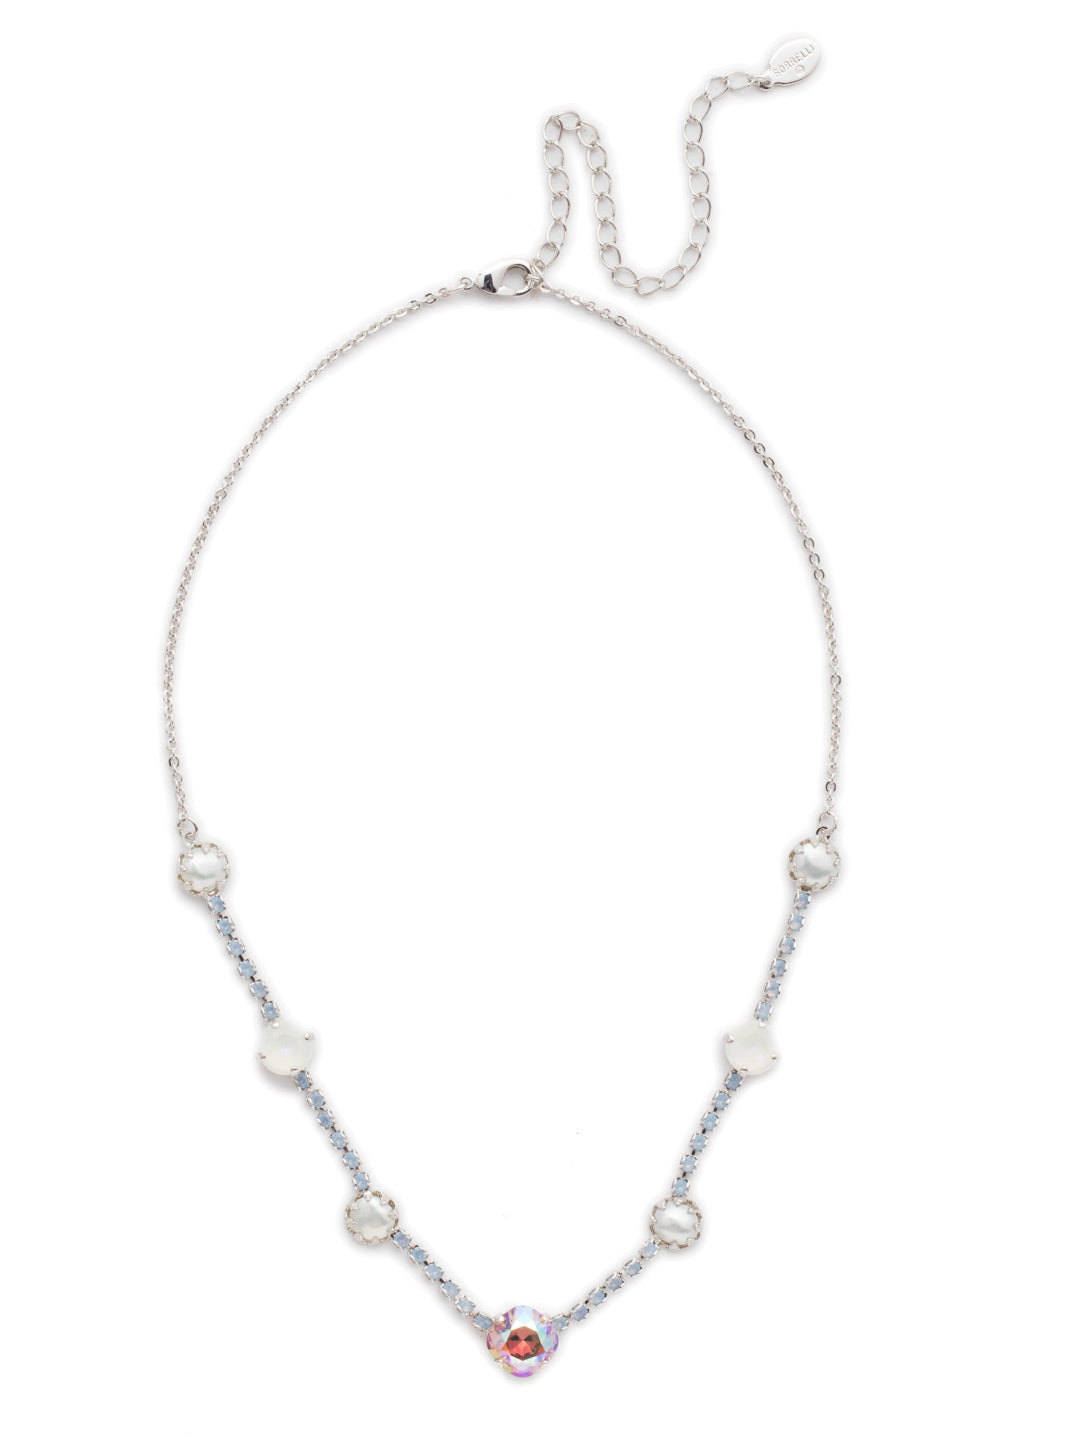 Caterina Tennis Necklace - NES11RHNTB - <p>Our Caterina Tennis Necklace is traditional style plus something extra with links of sparkling crystals bringing together bigger, bolder stones and pretty pearls. From Sorrelli's Nantucket Blue collection in our Palladium Silver-tone finish.</p>